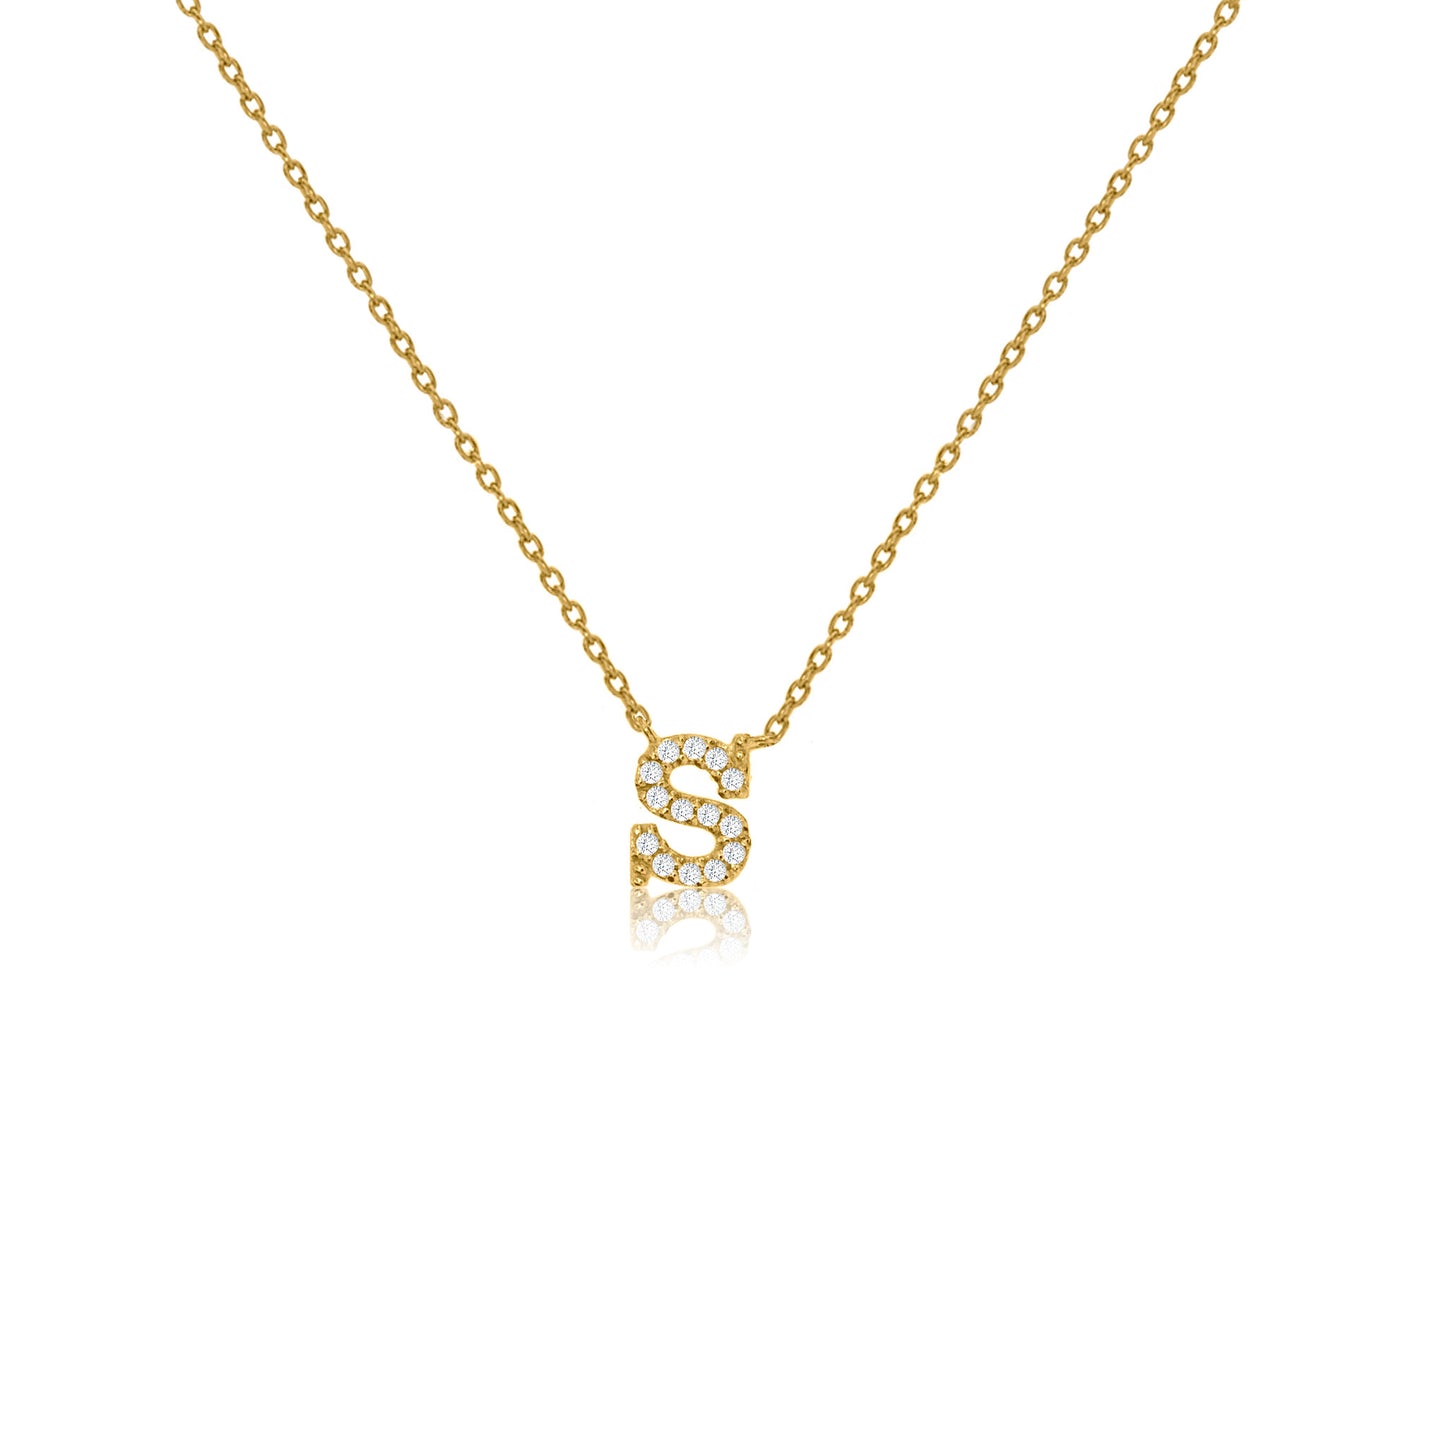 NT-26/G/S - Initial "S" Necklace with Sliding Length Adjuster